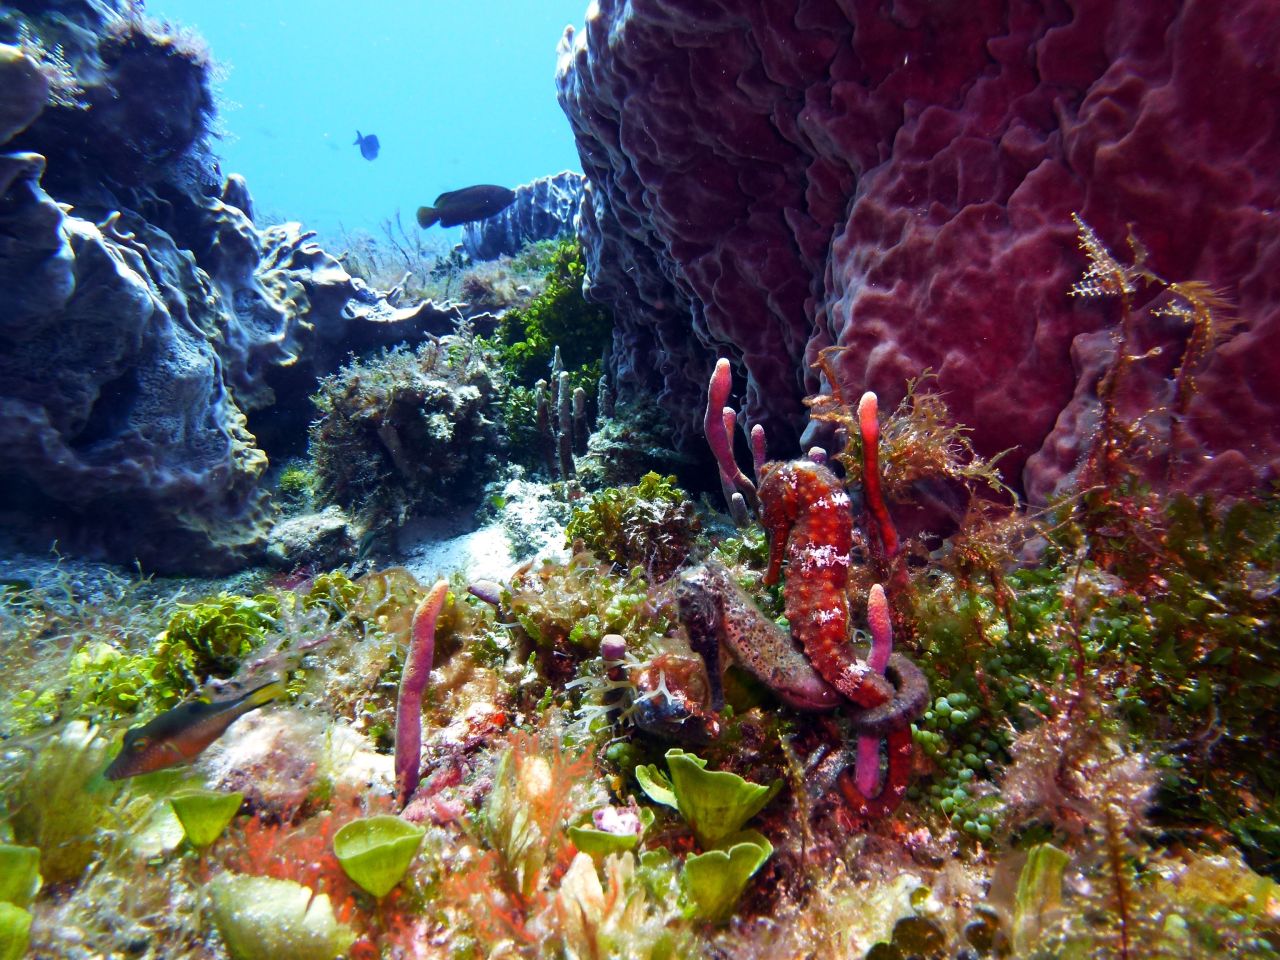 Can you spot the two seahorses embracing in this seahorse garden? <a href="http://ireport.cnn.com/docs/DOC-1141149">Bill Schwamle</a> did in Cozumel, Mexico.<br /><br />Click the double arrow to see more underwater photos.